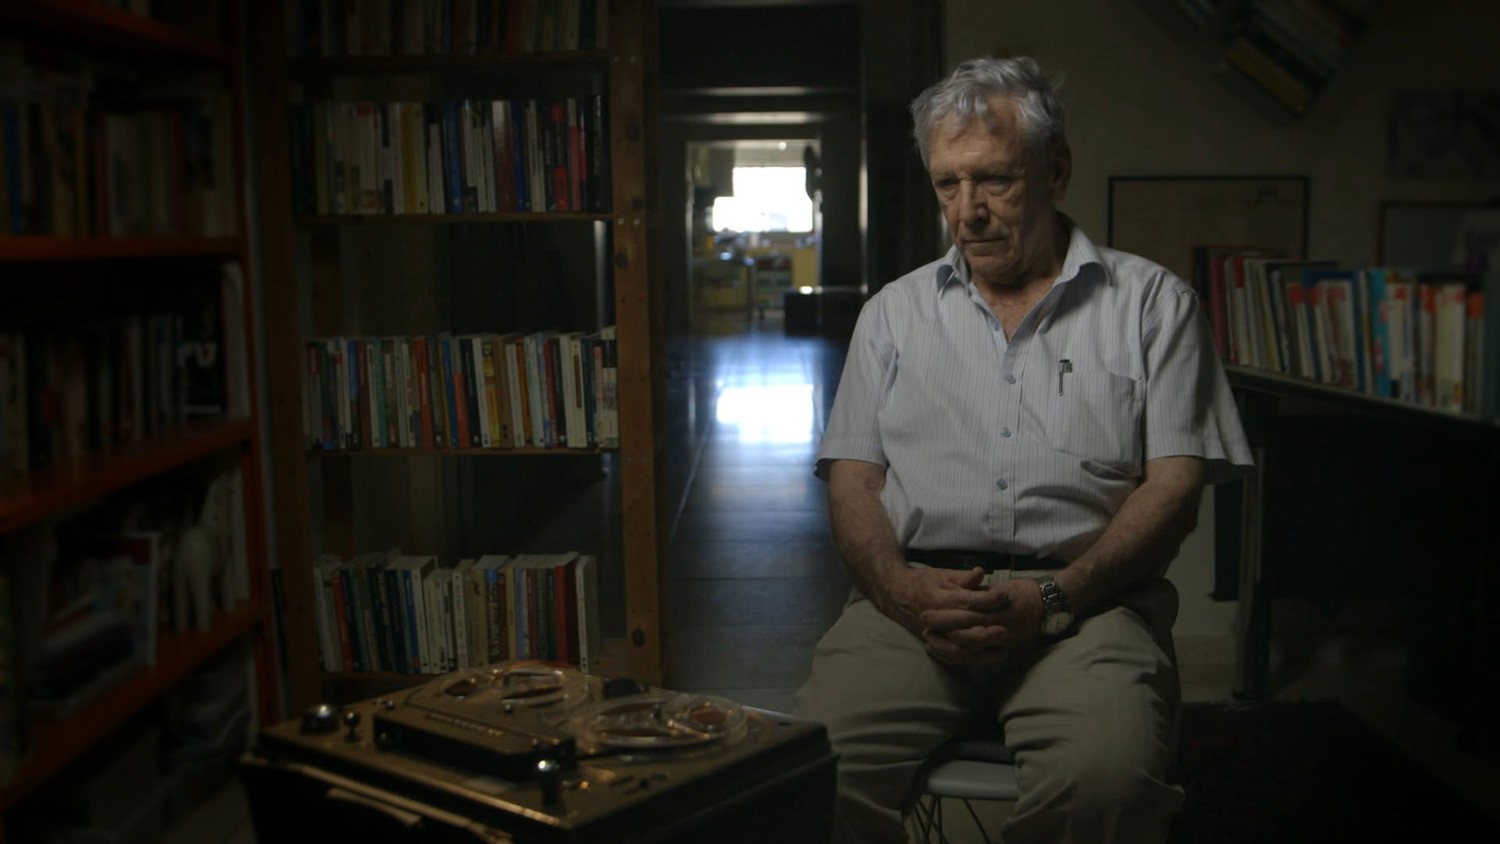 Amos Oz listens to testimony he gave after the Six-Day War, in which he fought. Photo by Avner Shahaf.
